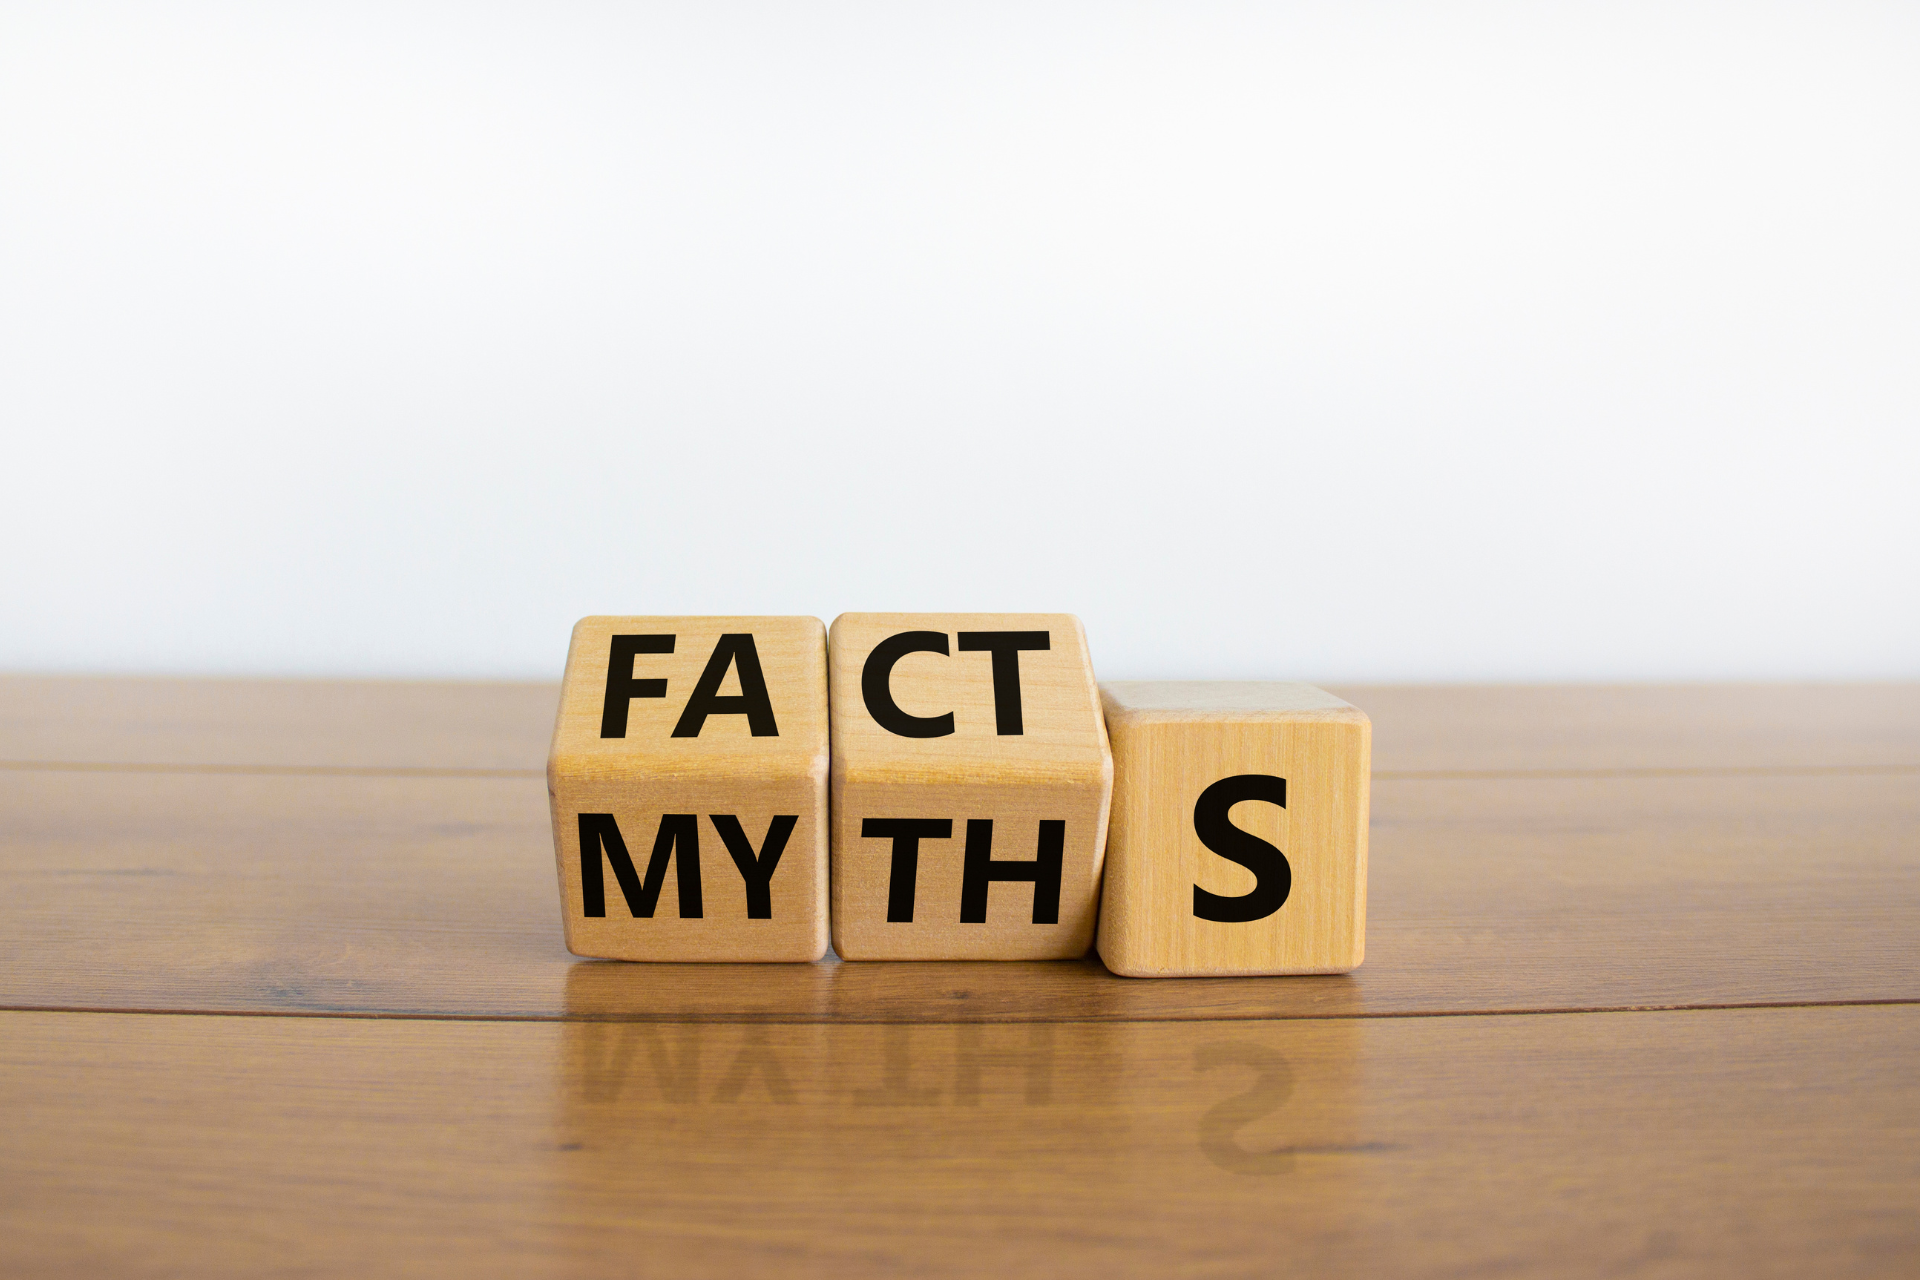 the word myth is written on wooden blocks on a wooden table .